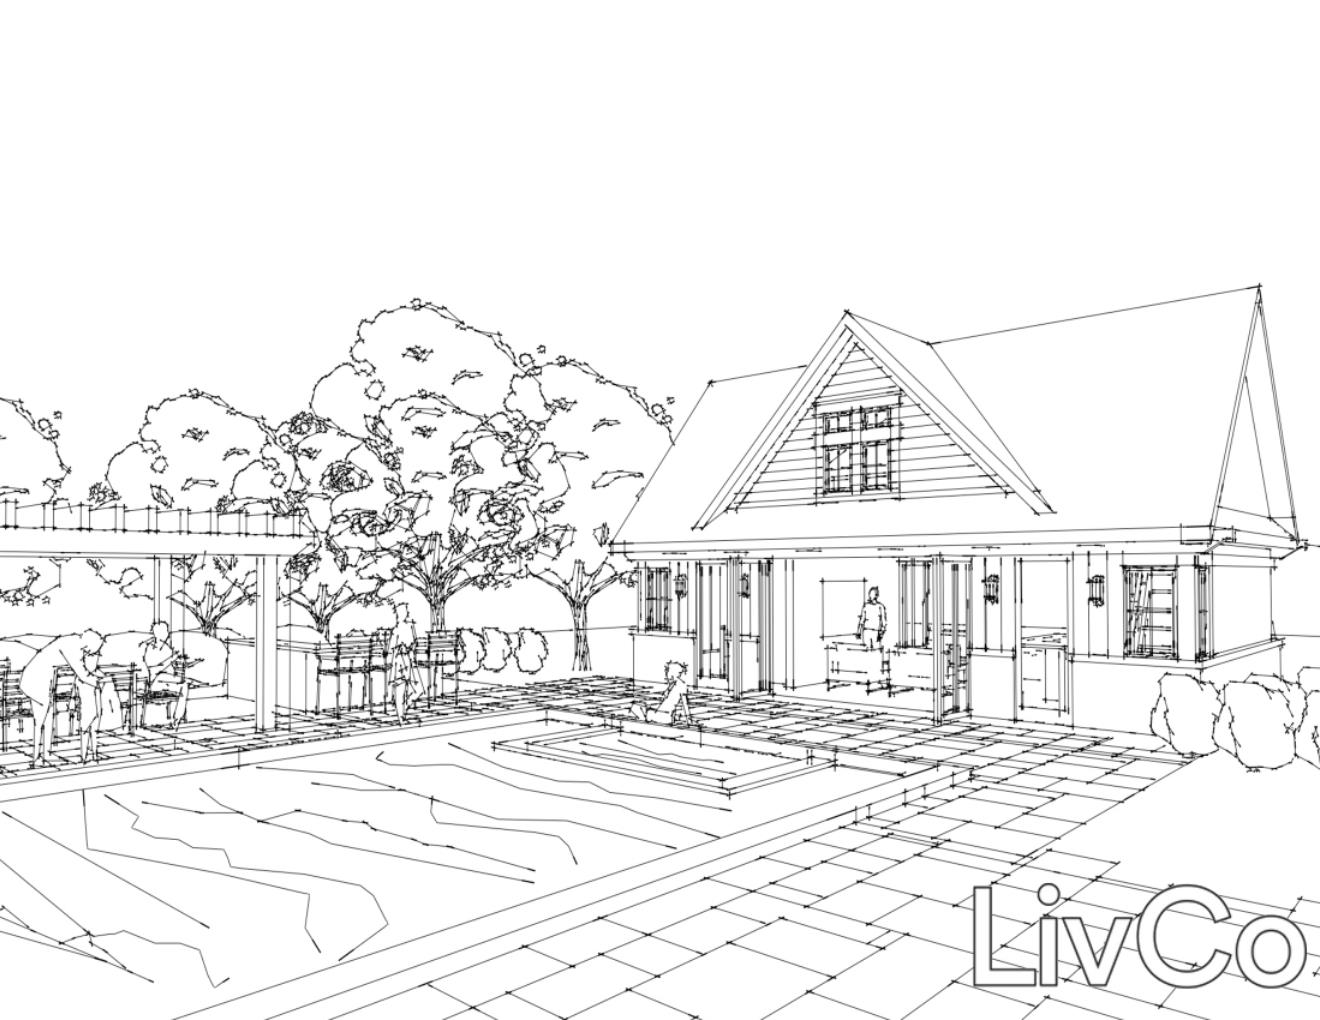 perspective lie drawing of a pool house